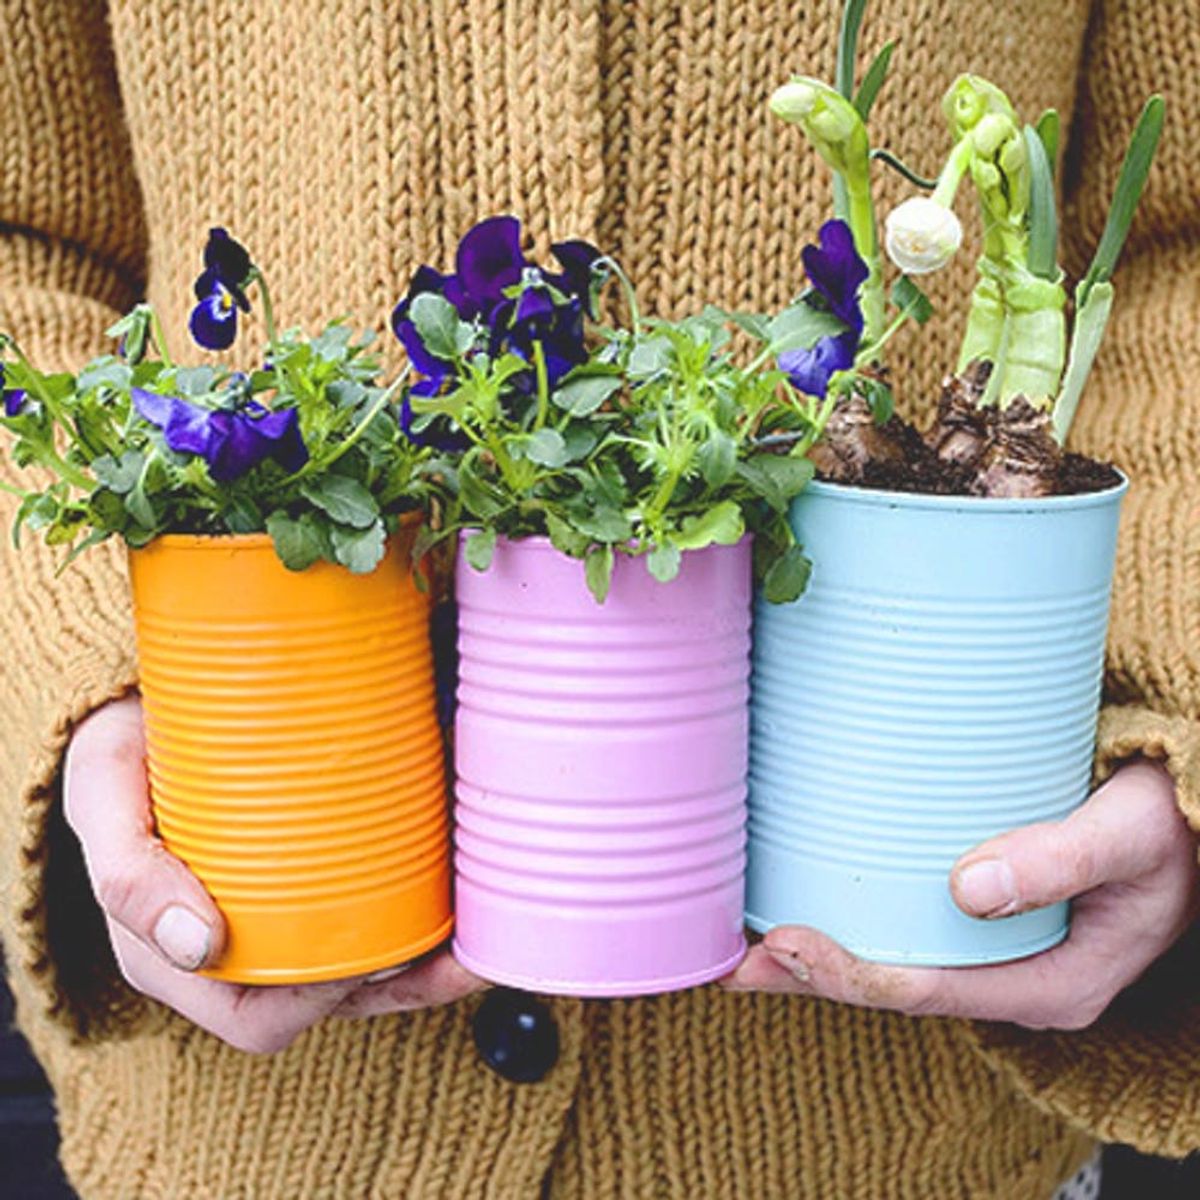 12 Upcycled Planters You Can Make From Stuff You Have at Home